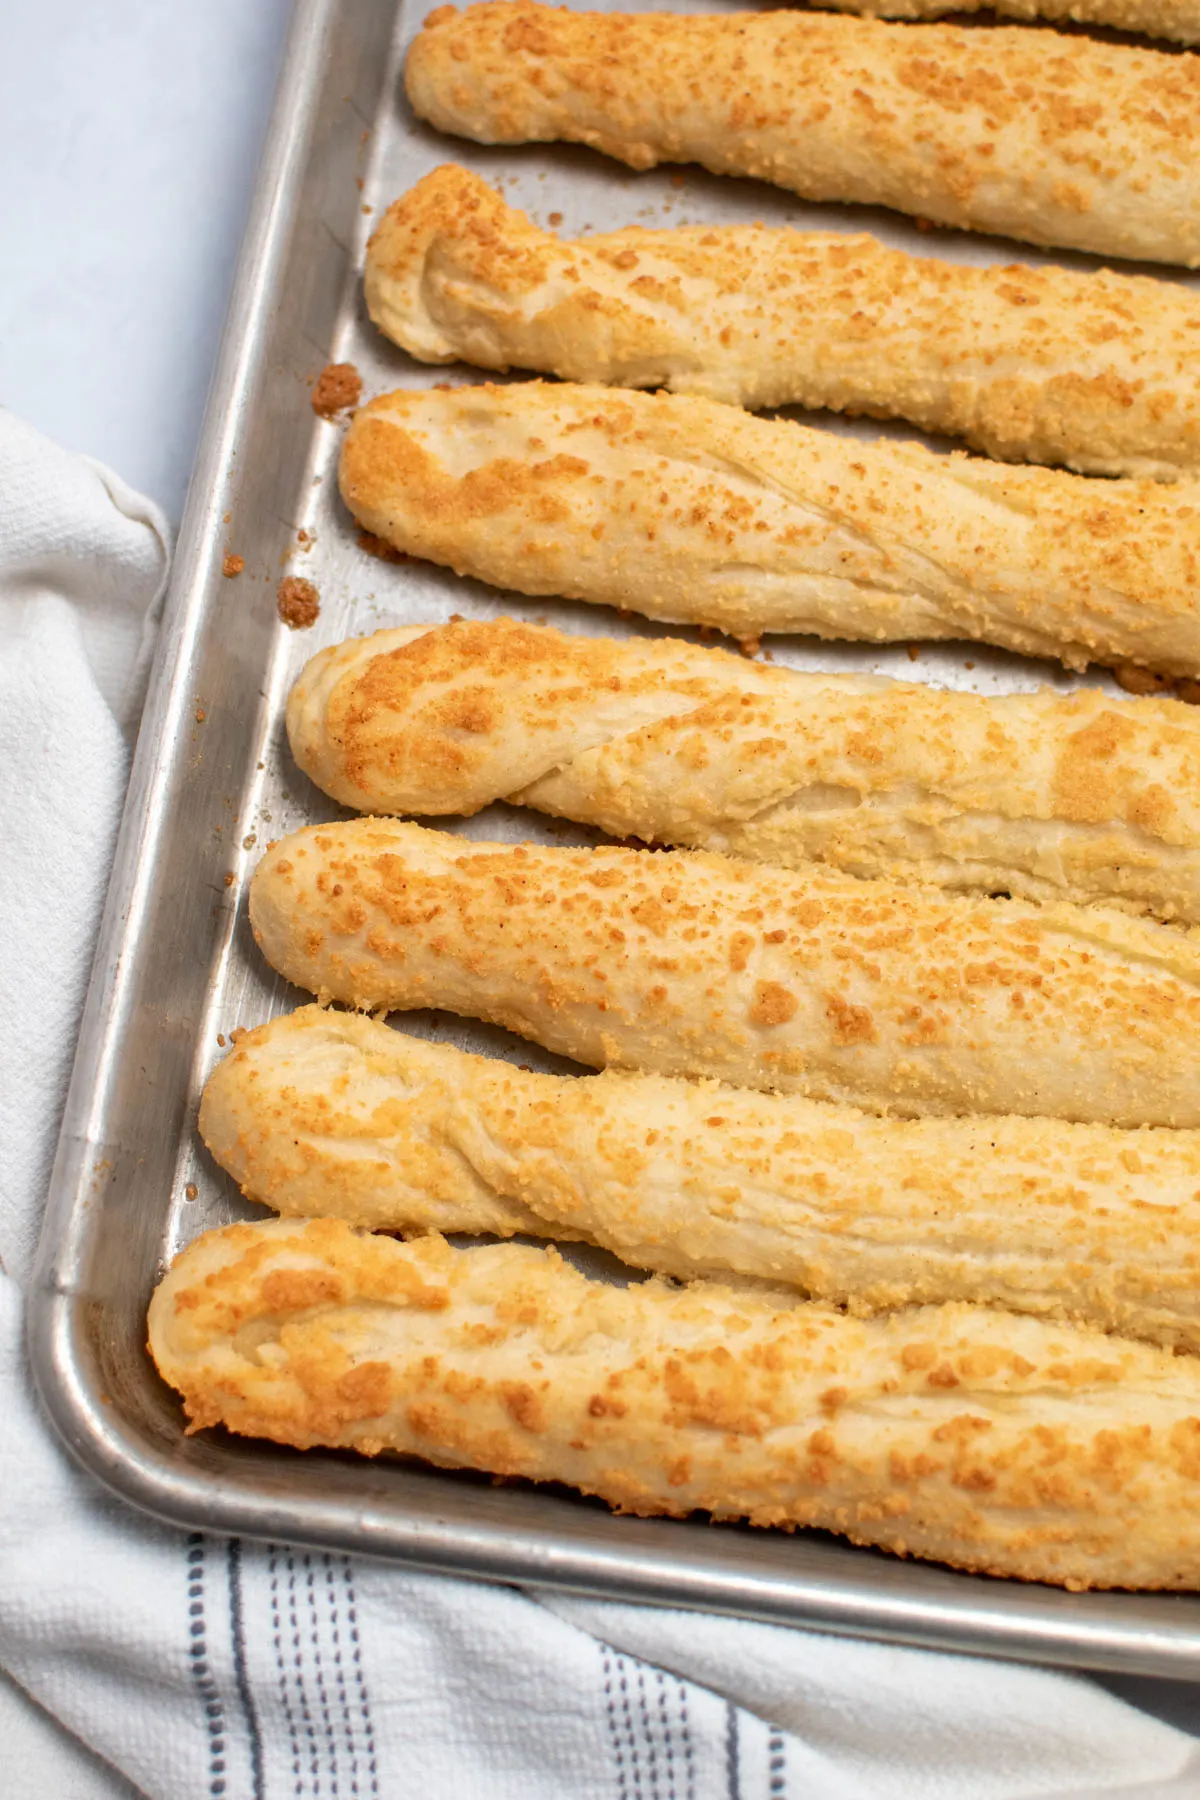 Several homemade breadsticks with parmesan cheese on metal baking sheet.